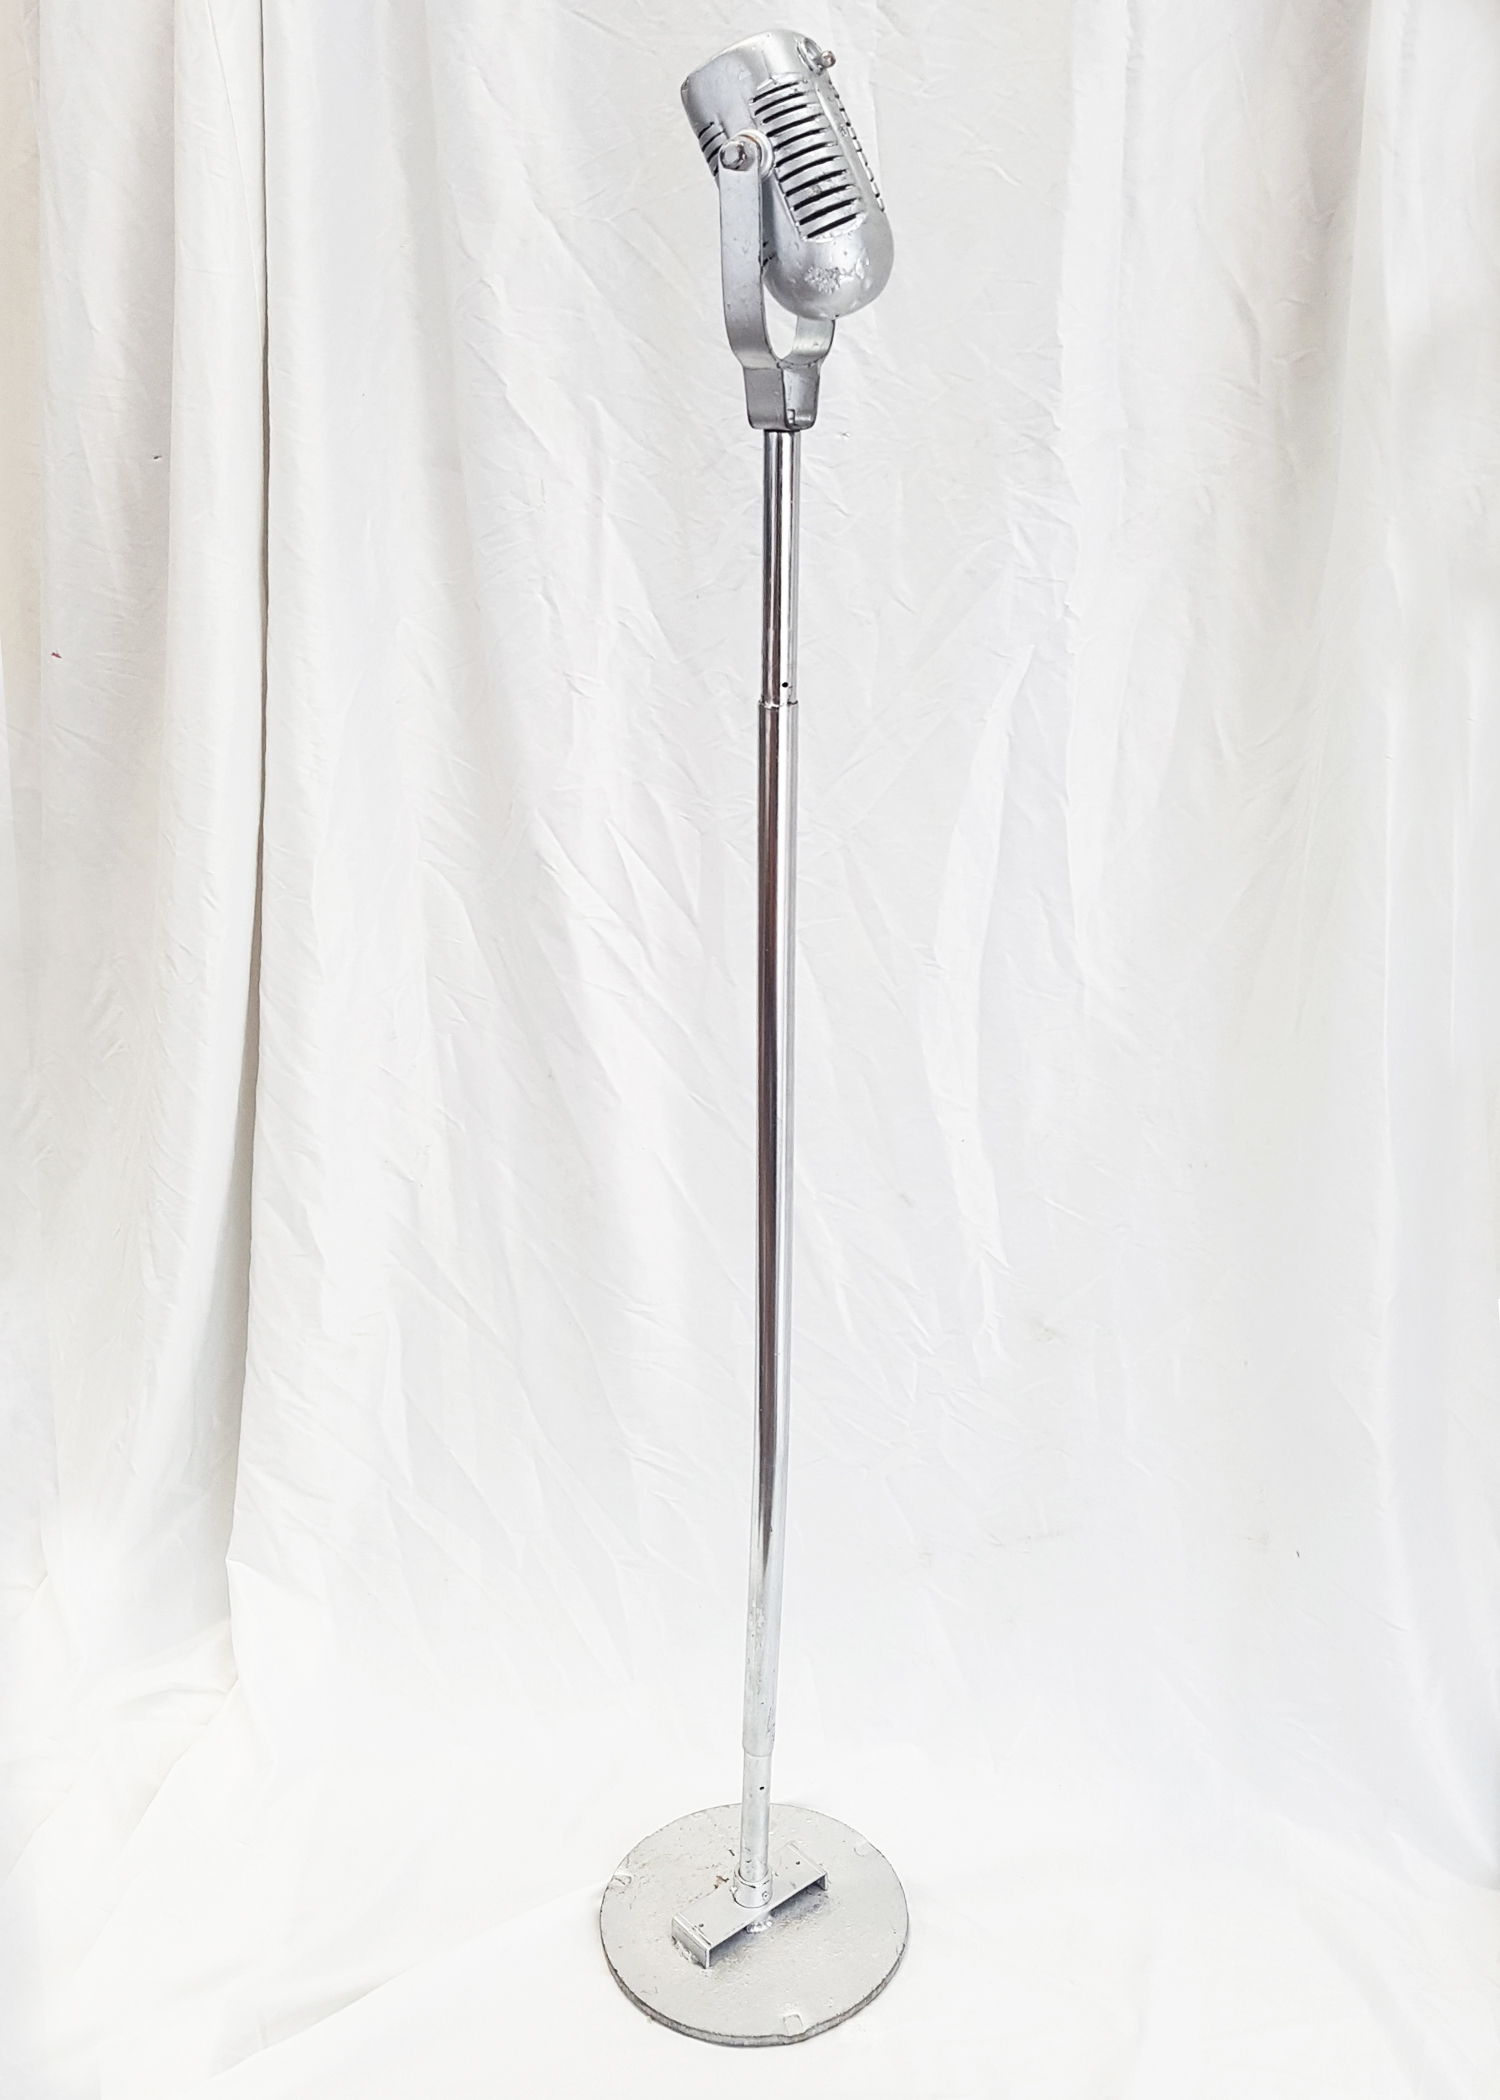 Imitation Microphone on Stand #2 (H: 1.5m)